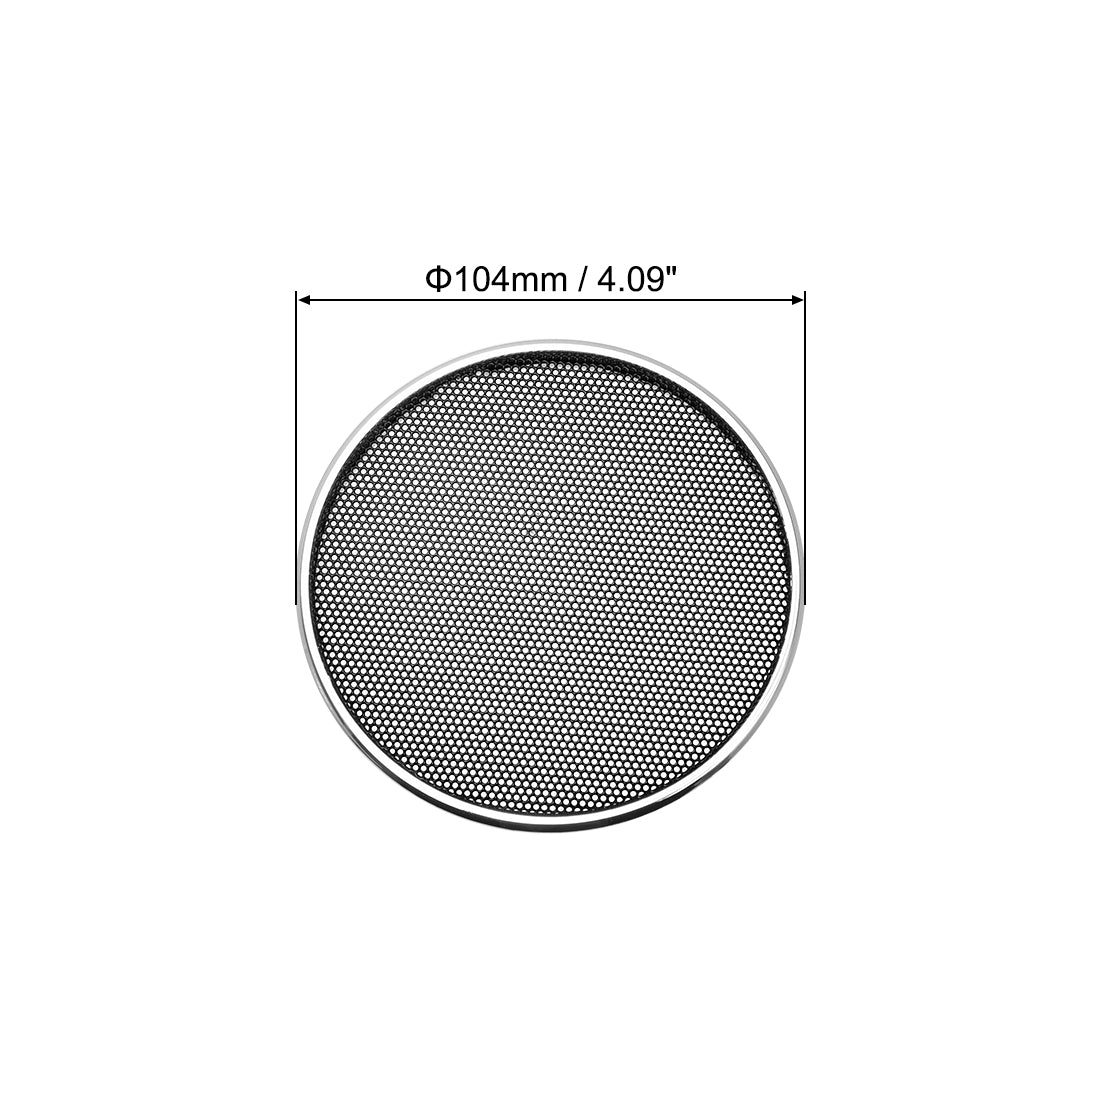 uxcell Uxcell 2pcs 3" Speaker Grill Mesh Decorative Circle Woofer Guard Protector Cover Audio Parts Silver